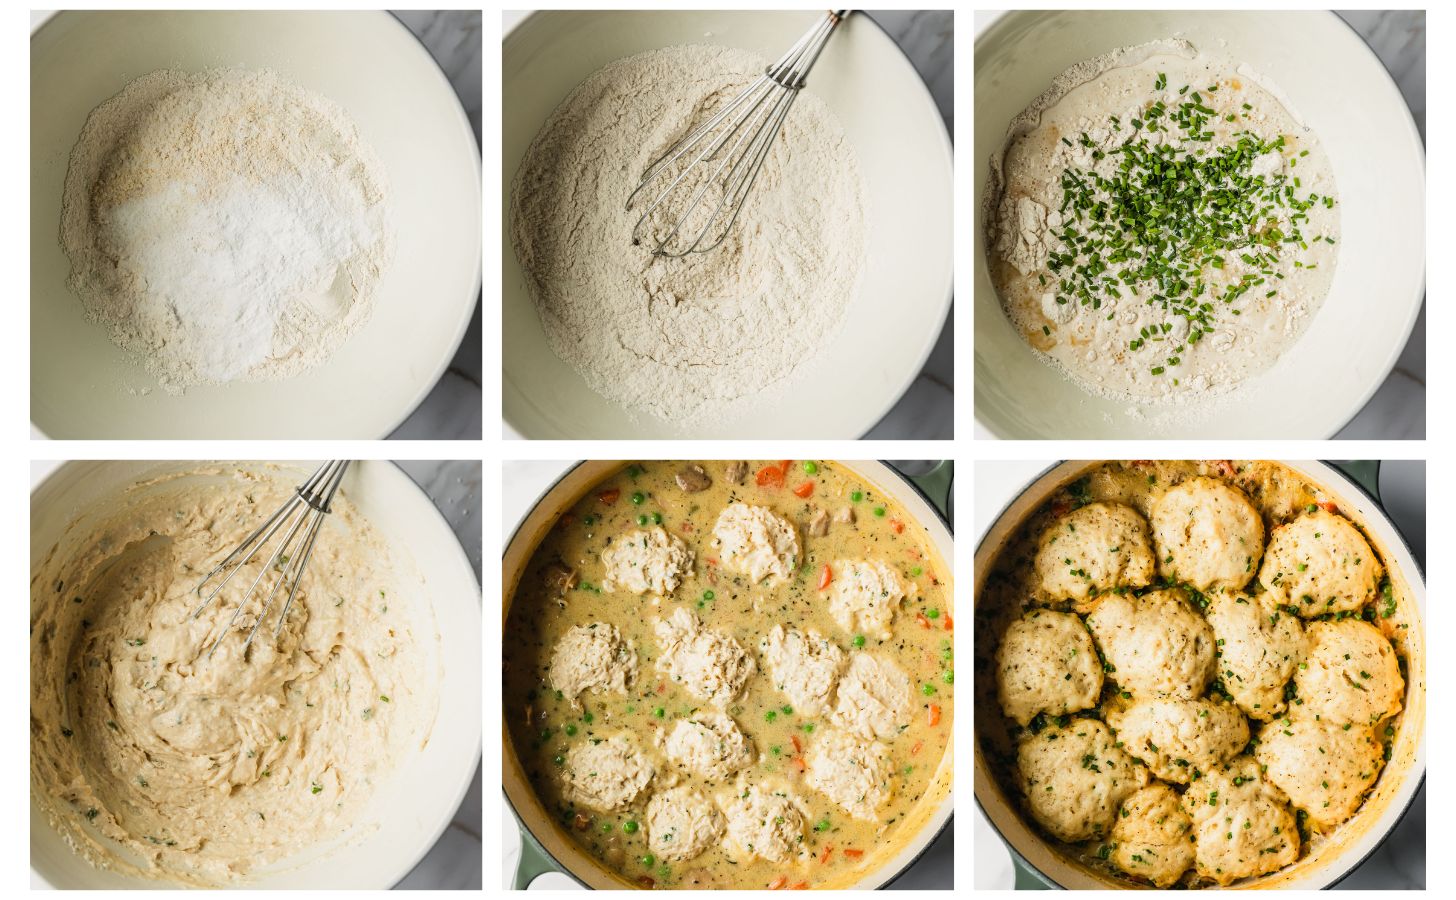 Six steps to making Dutch oven chicken and dumplings. In photo 1, a white bowl has flour and baking powder. In photo 2, the flour is whisked. In photo 3, the flour has buttermilk, an egg, butter, and chives. In photo 4, the batter is whisked. In photo 6, the batter is spooned into a Dutch oven with chicken soup. In photo 6, the dumplings are cooked through.